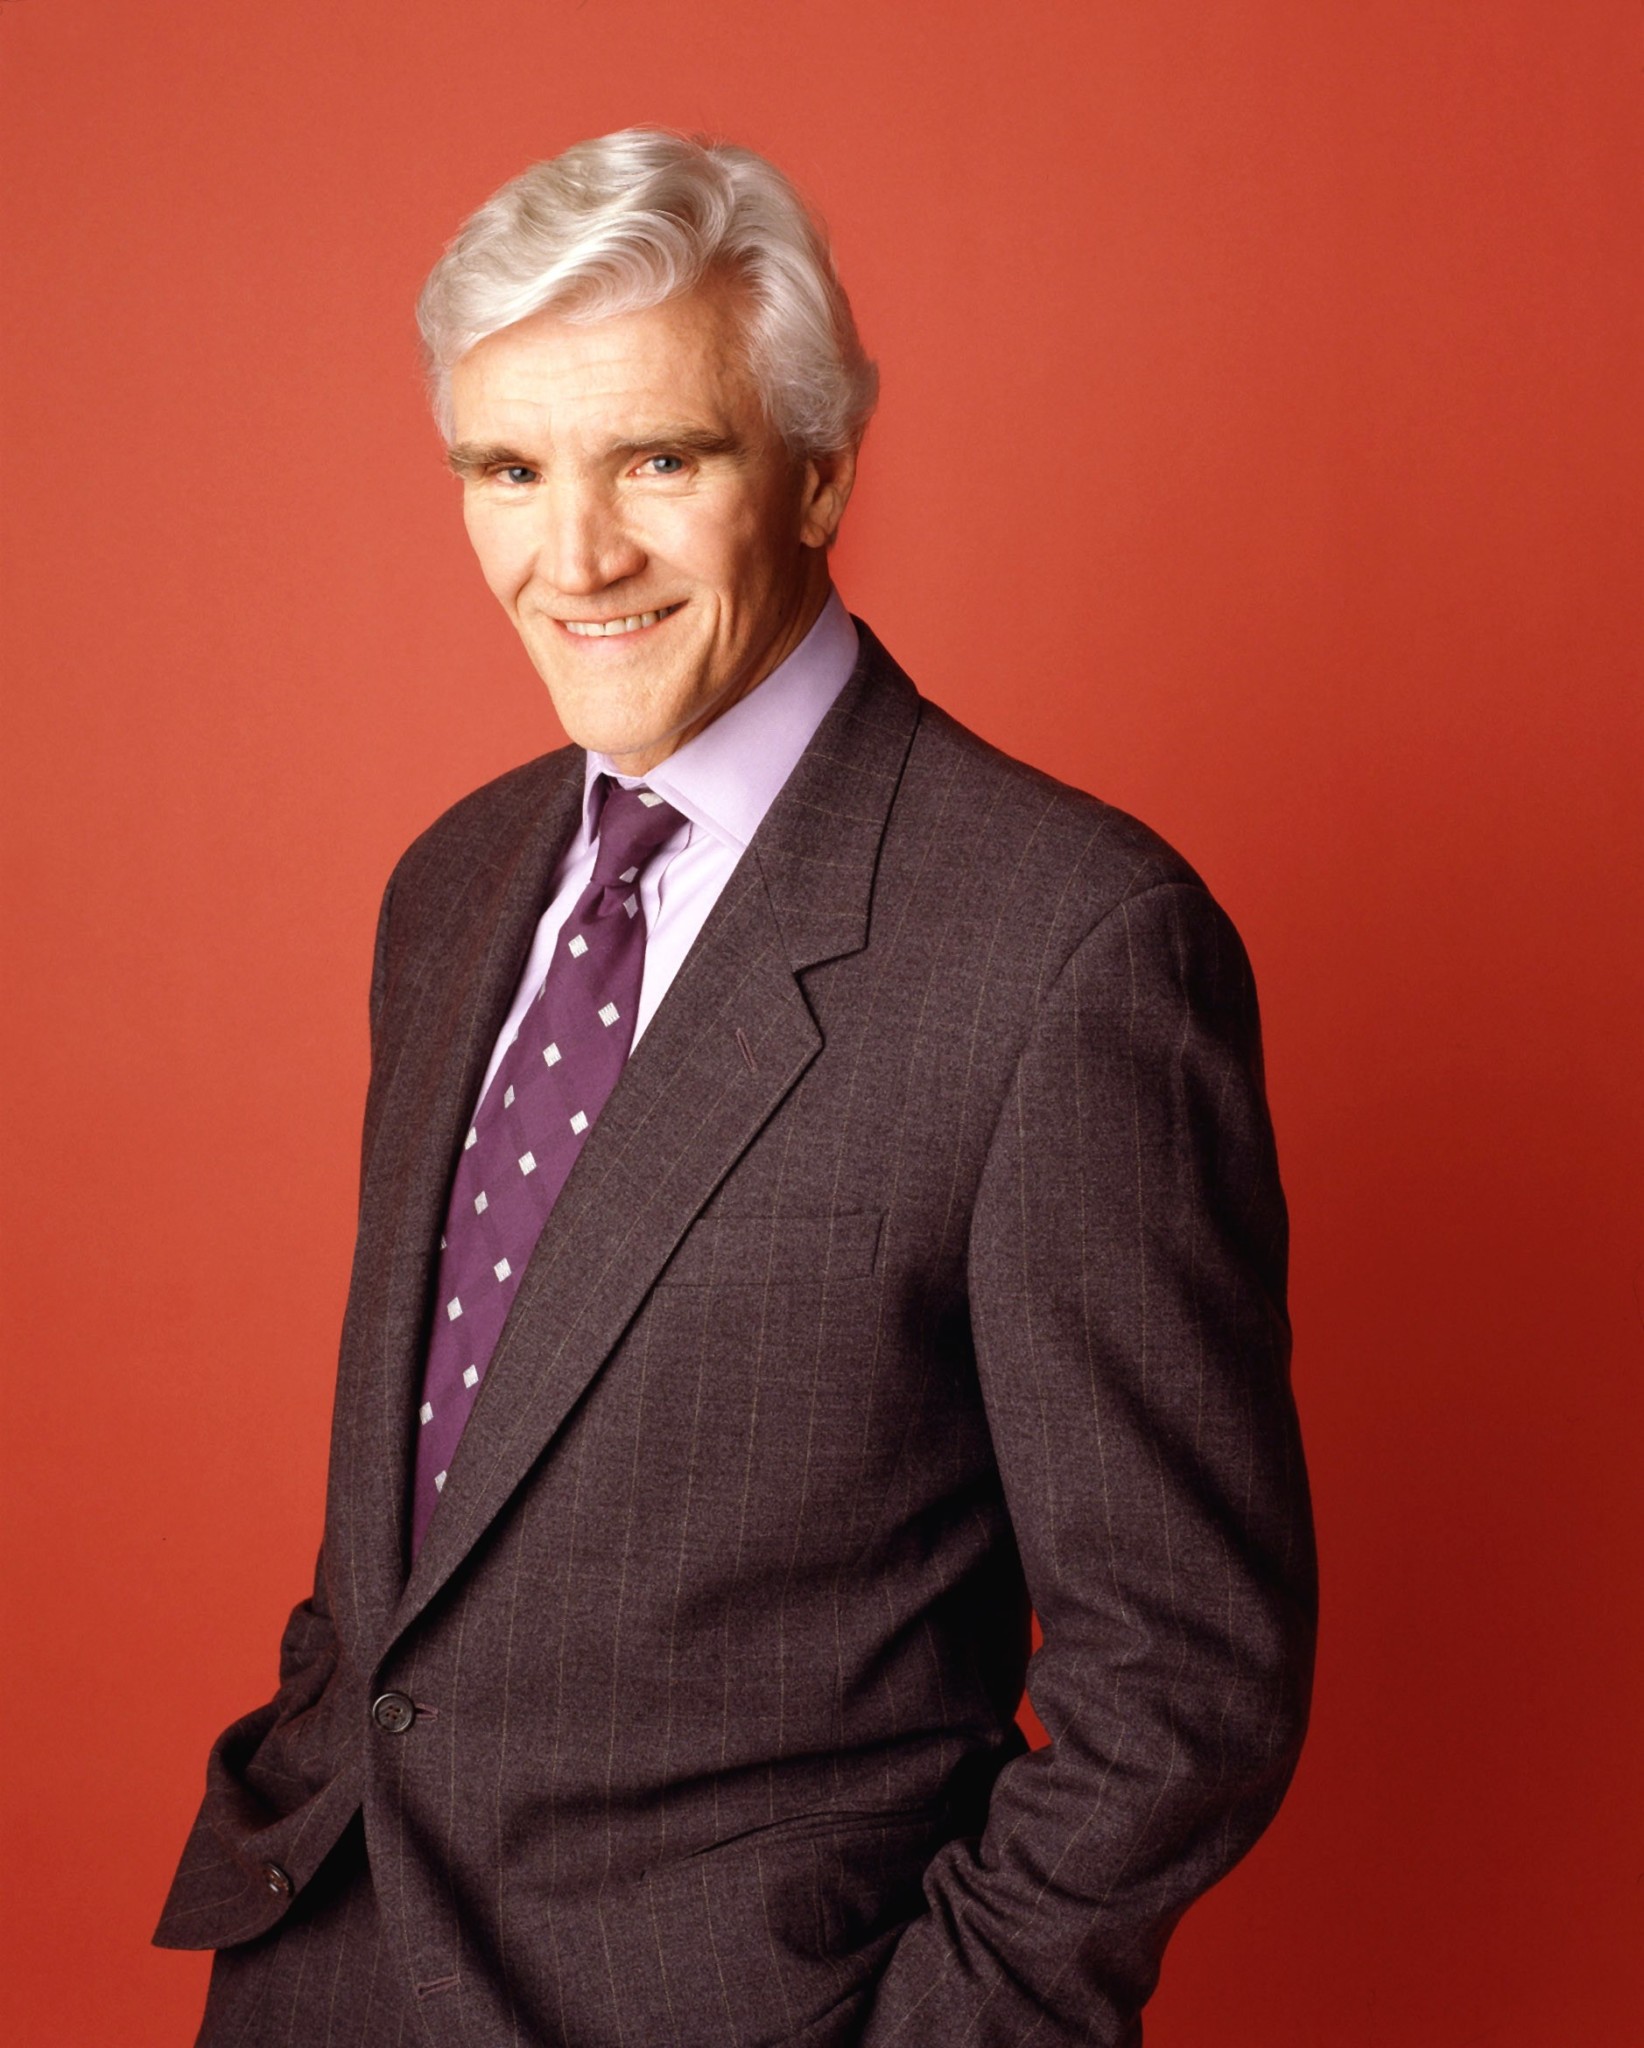 ALL MY CHILDREN, David Canary, 1970-2011. © ABC / Courtesy: Everett Collection